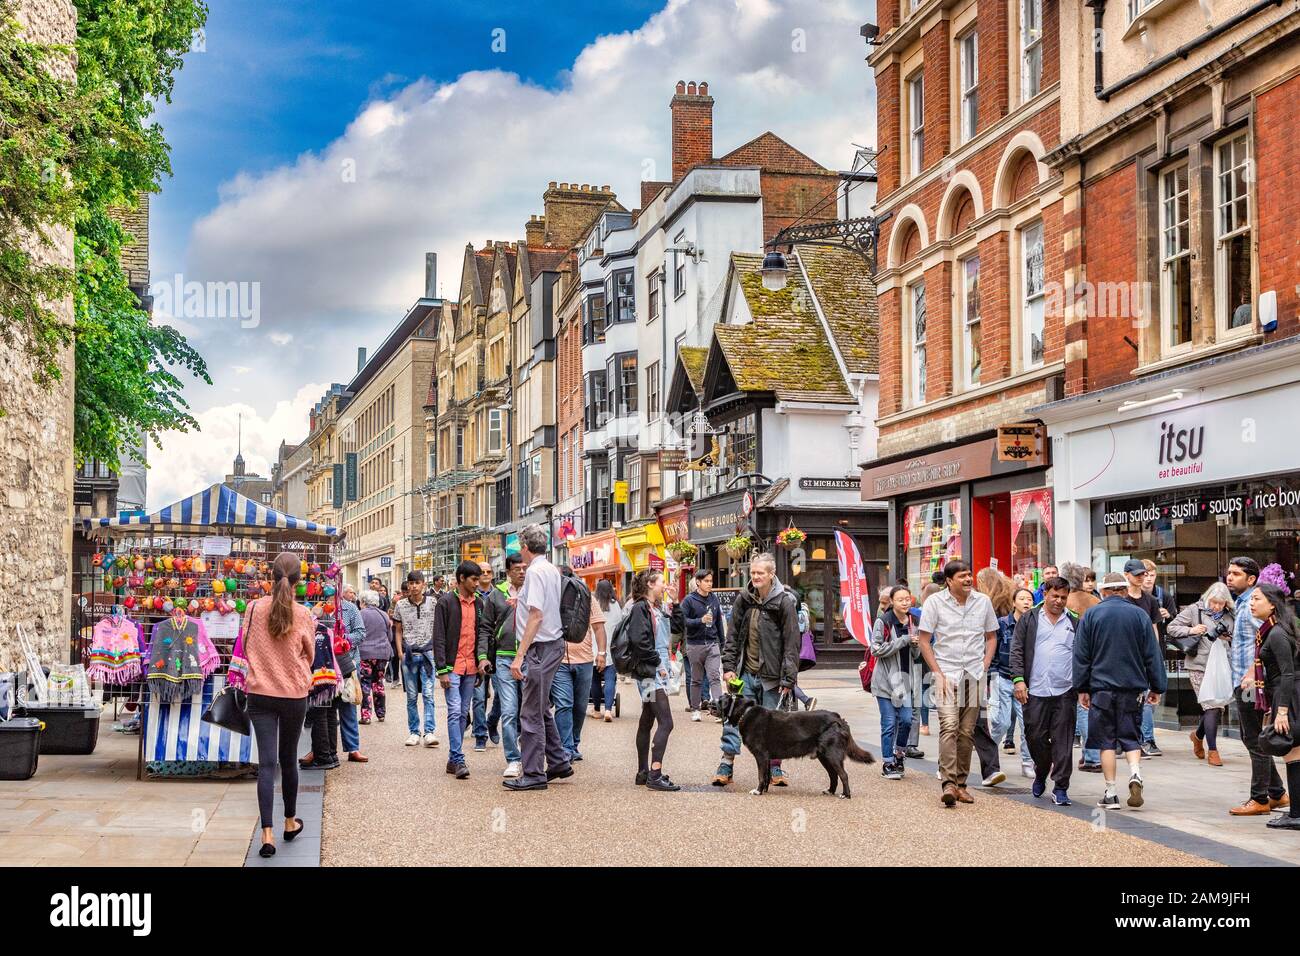 6 June 2019: Oxford, UK - Cornmarket Street, crowds sightseeing and shopping in one of Oxford's main shopping areas. Stock Photo